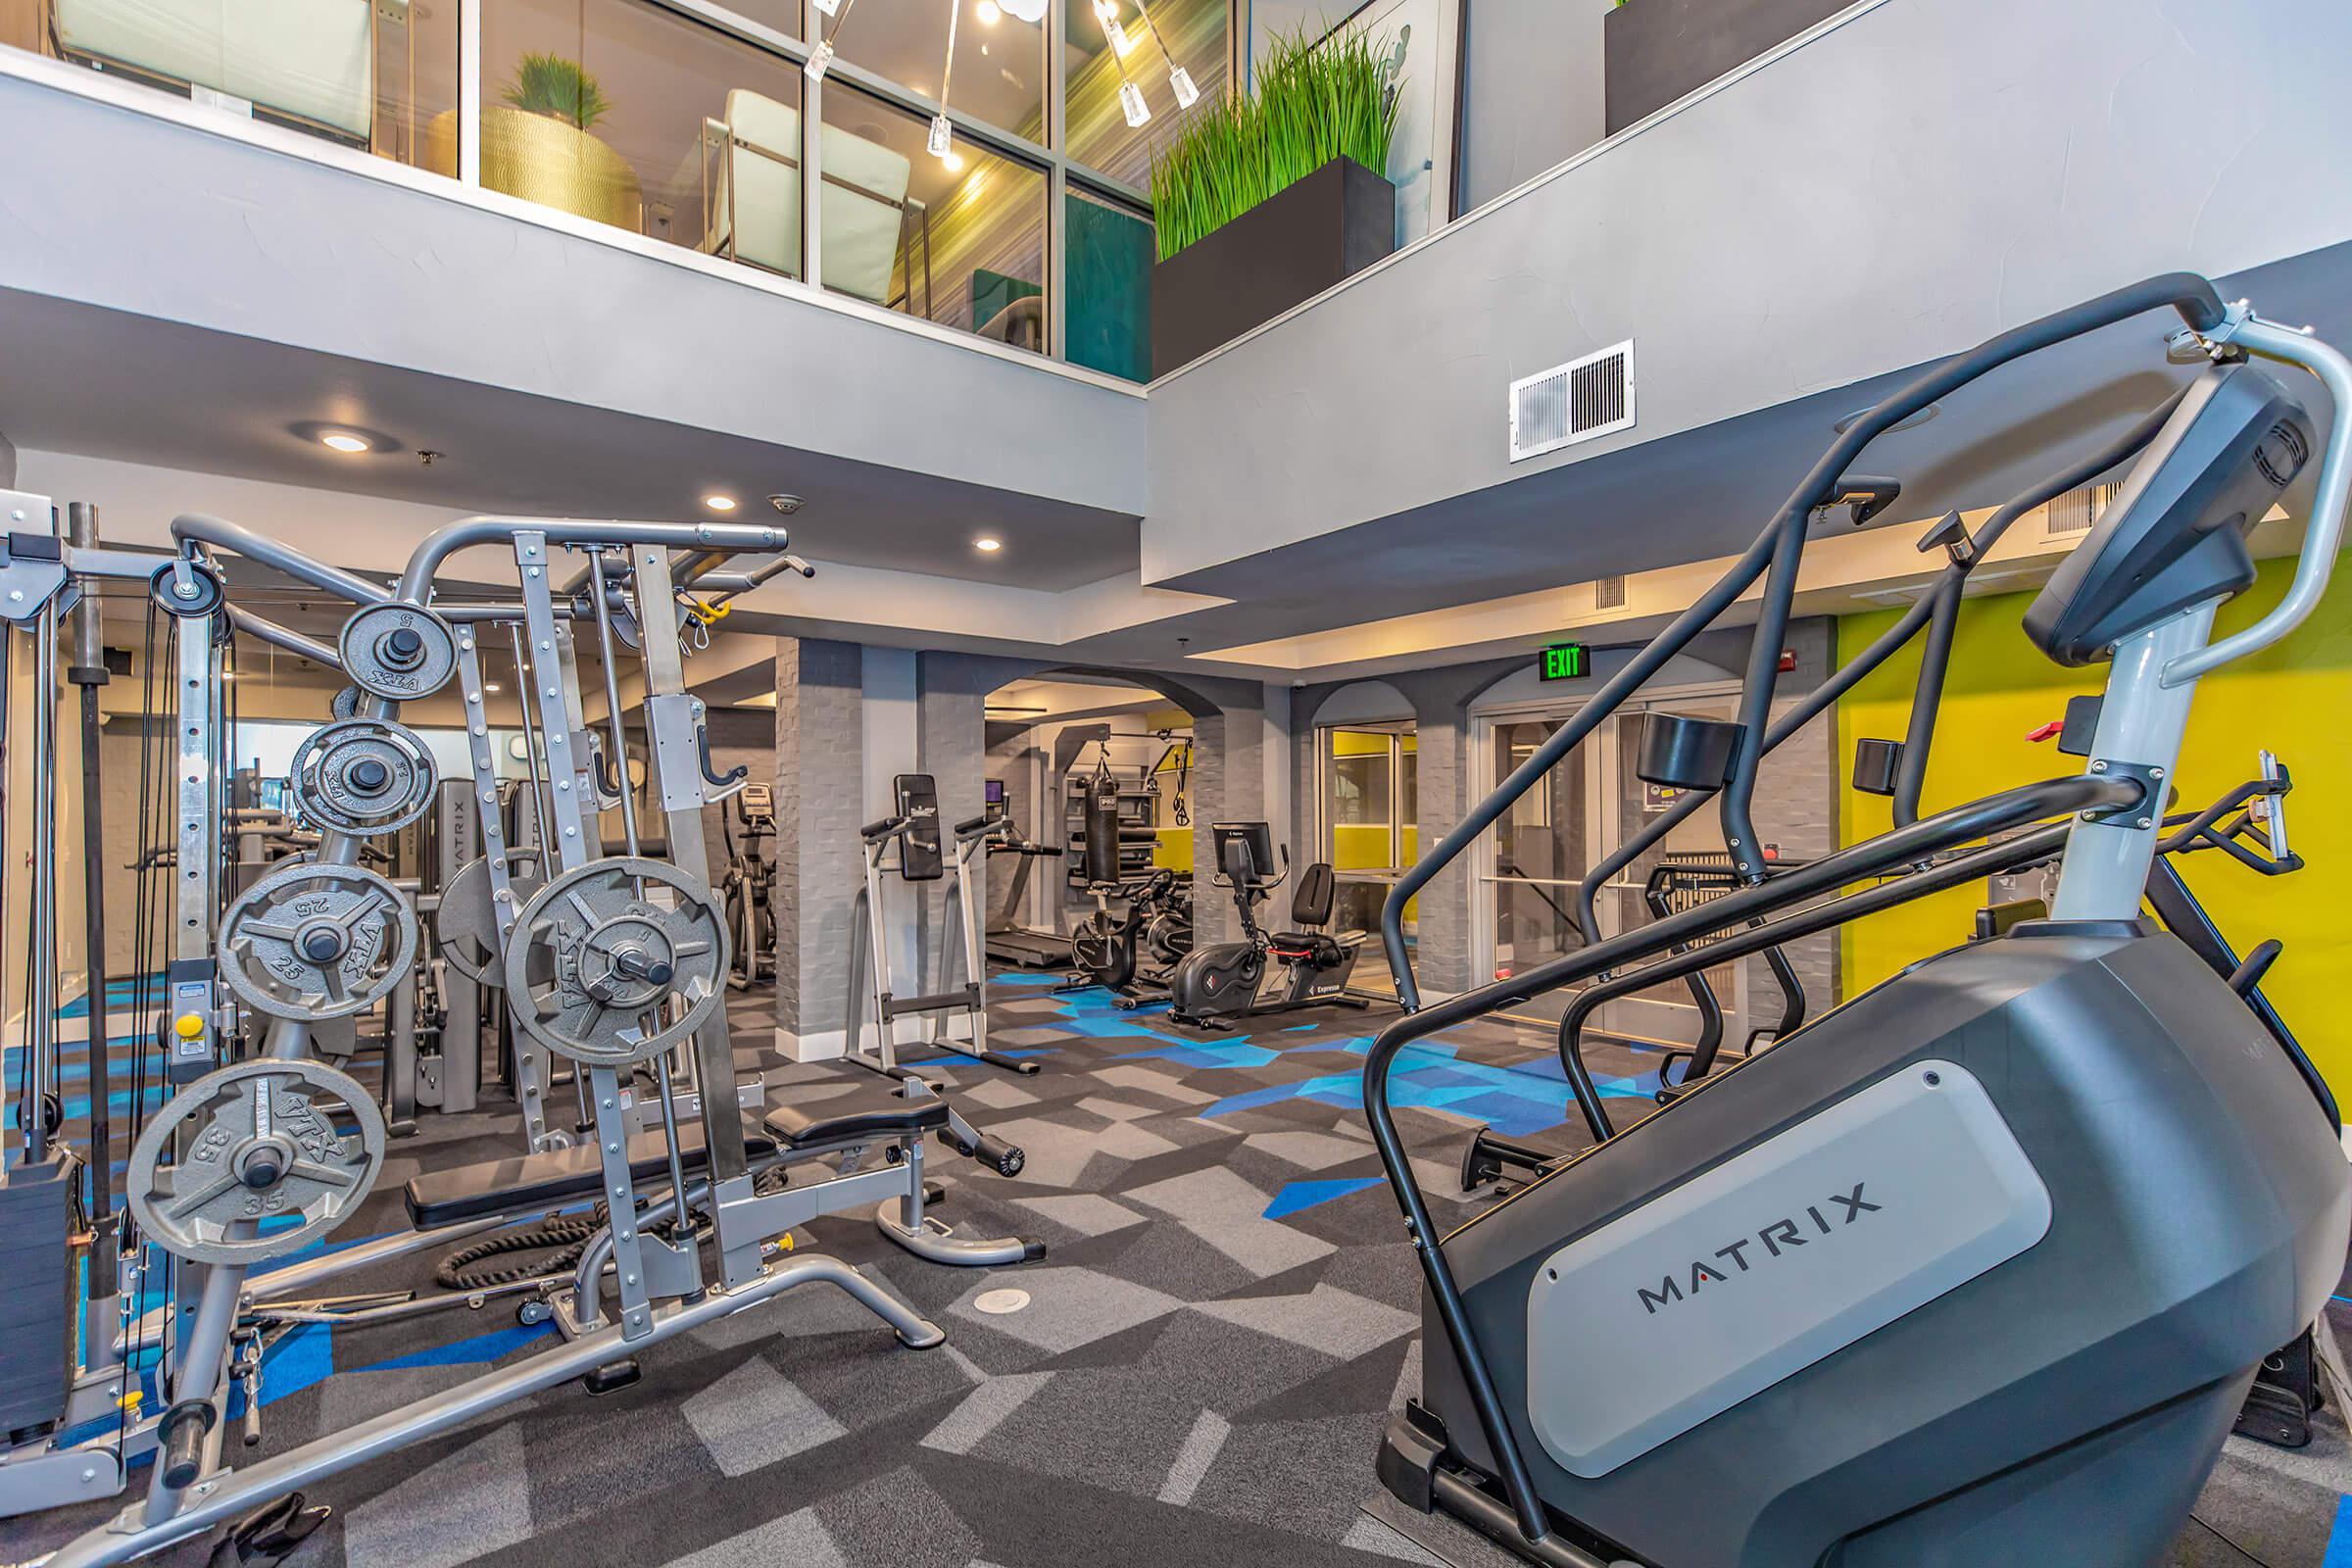 EXPANSIVE 24/7 FITNESS CENTER FOR OUR RESIDENTS TO ENJOY